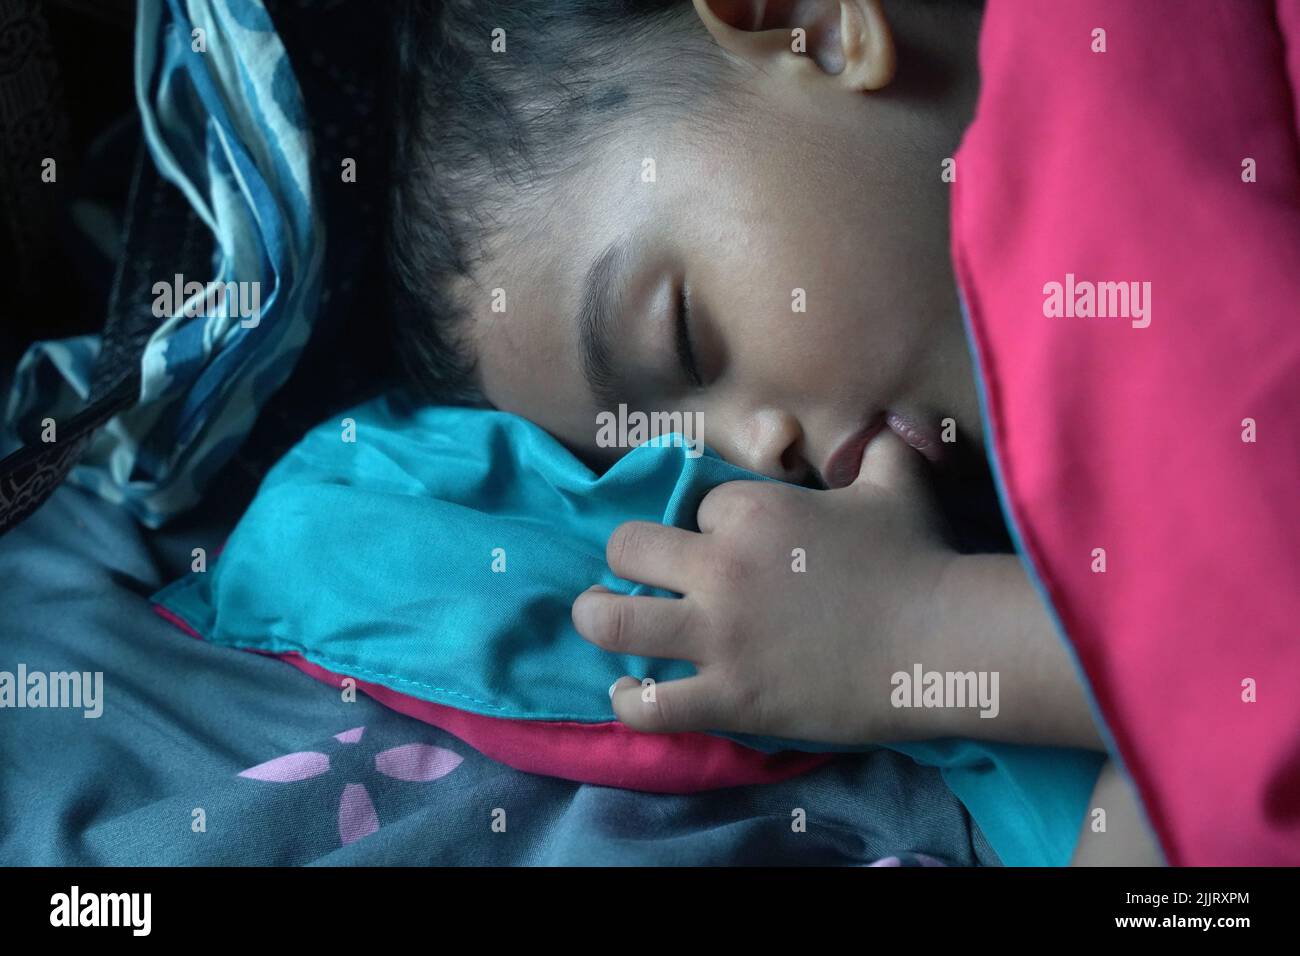 A closeup portrait of a South Asian girl sucking her thumb in her sleep Stock Photo